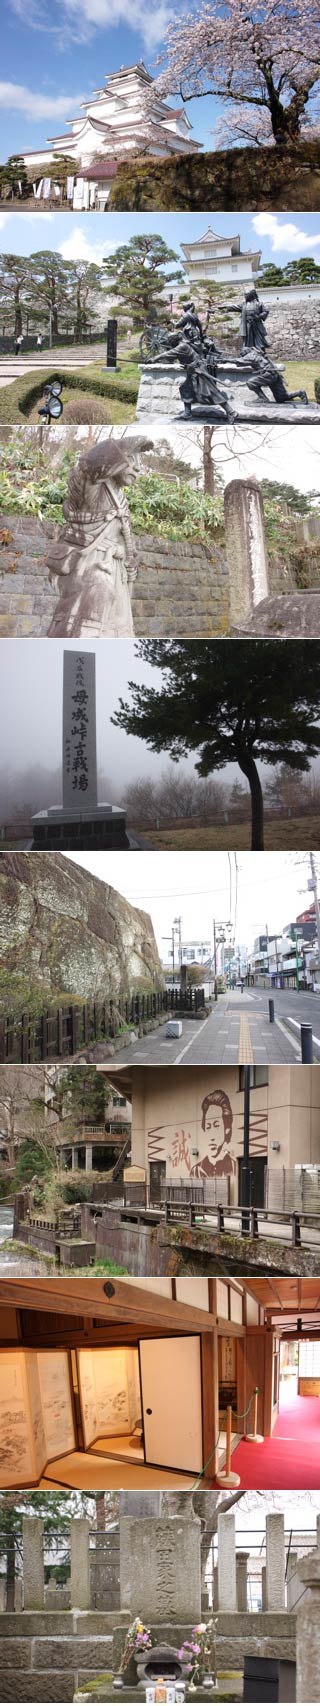 The battle of Aizu